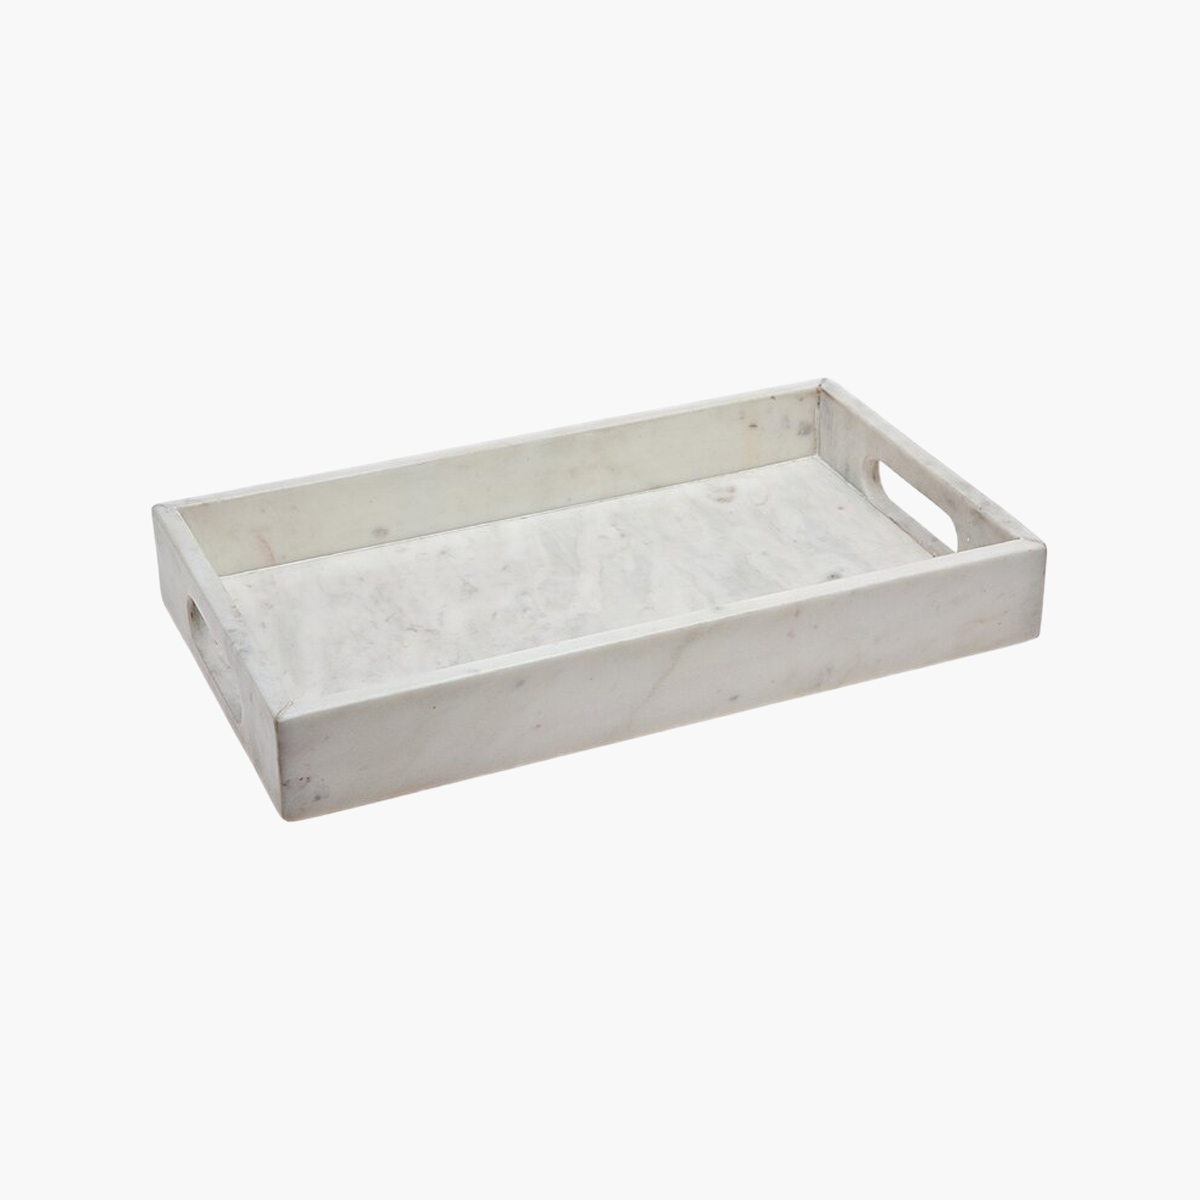 A white marble serving tray.